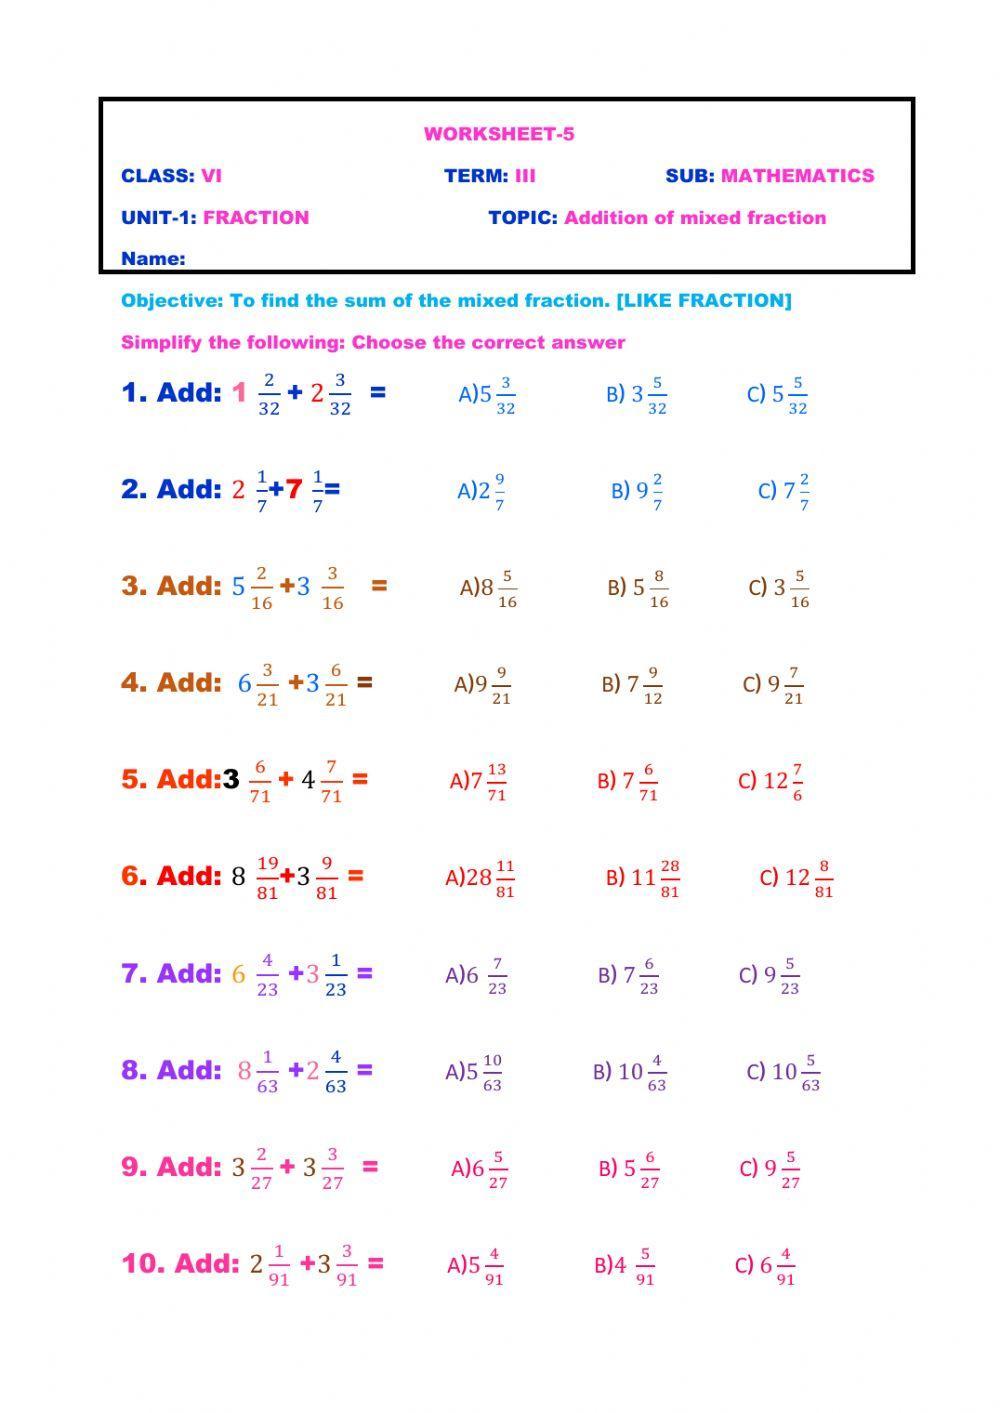 Addition of mixed fraction